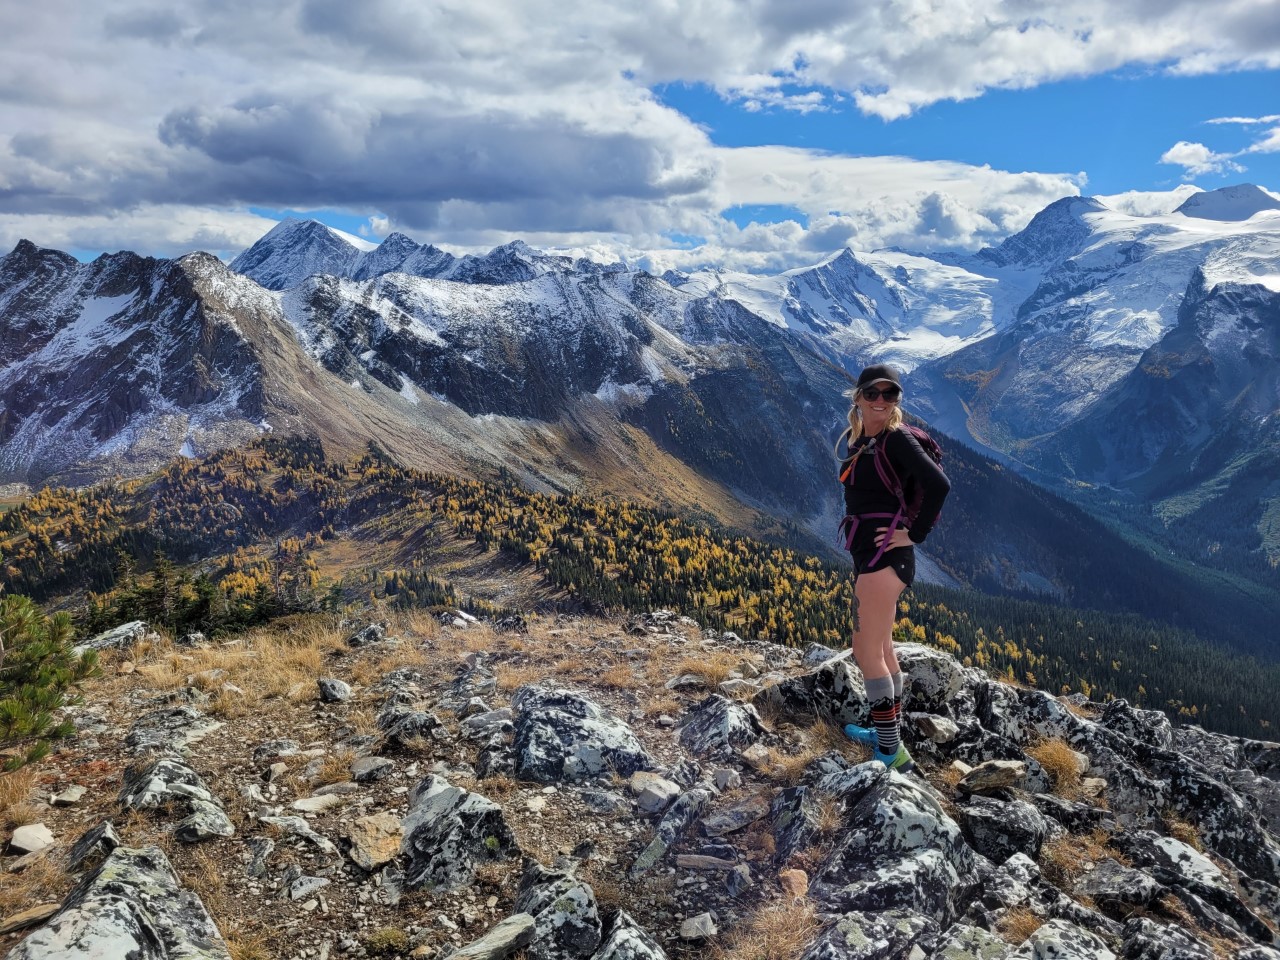 A woman with blonde pigtails wearing a black ball cap, pullover and shorts and purple backpack stands with her hands on her hips on a mountain peak set against a field of yellow flowers and snowcapped mountains